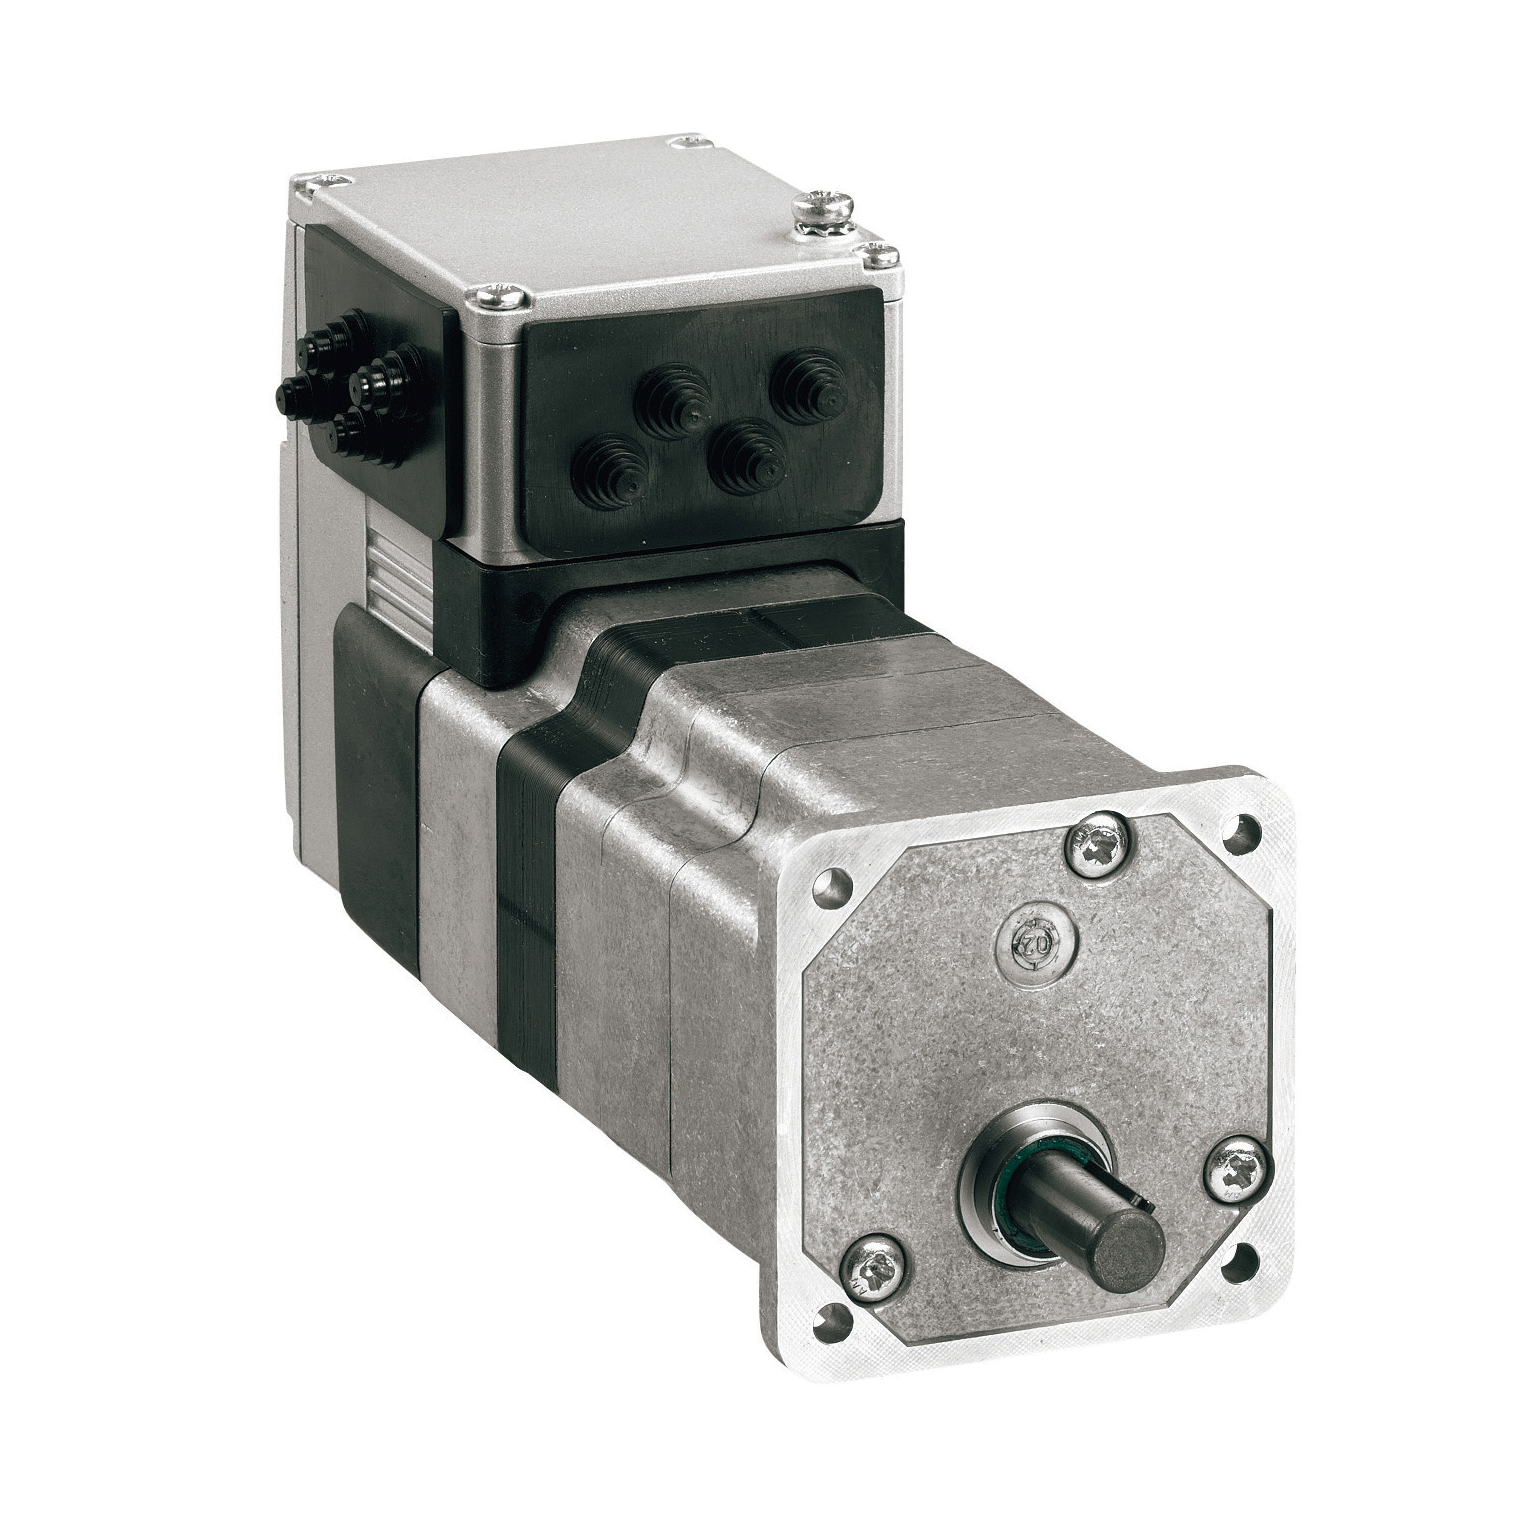 brushless DC motor, Lexium ILA ILE ILS, 24 to 48V, EtherNet IP interface, industrial connector, 174mm, 54:1